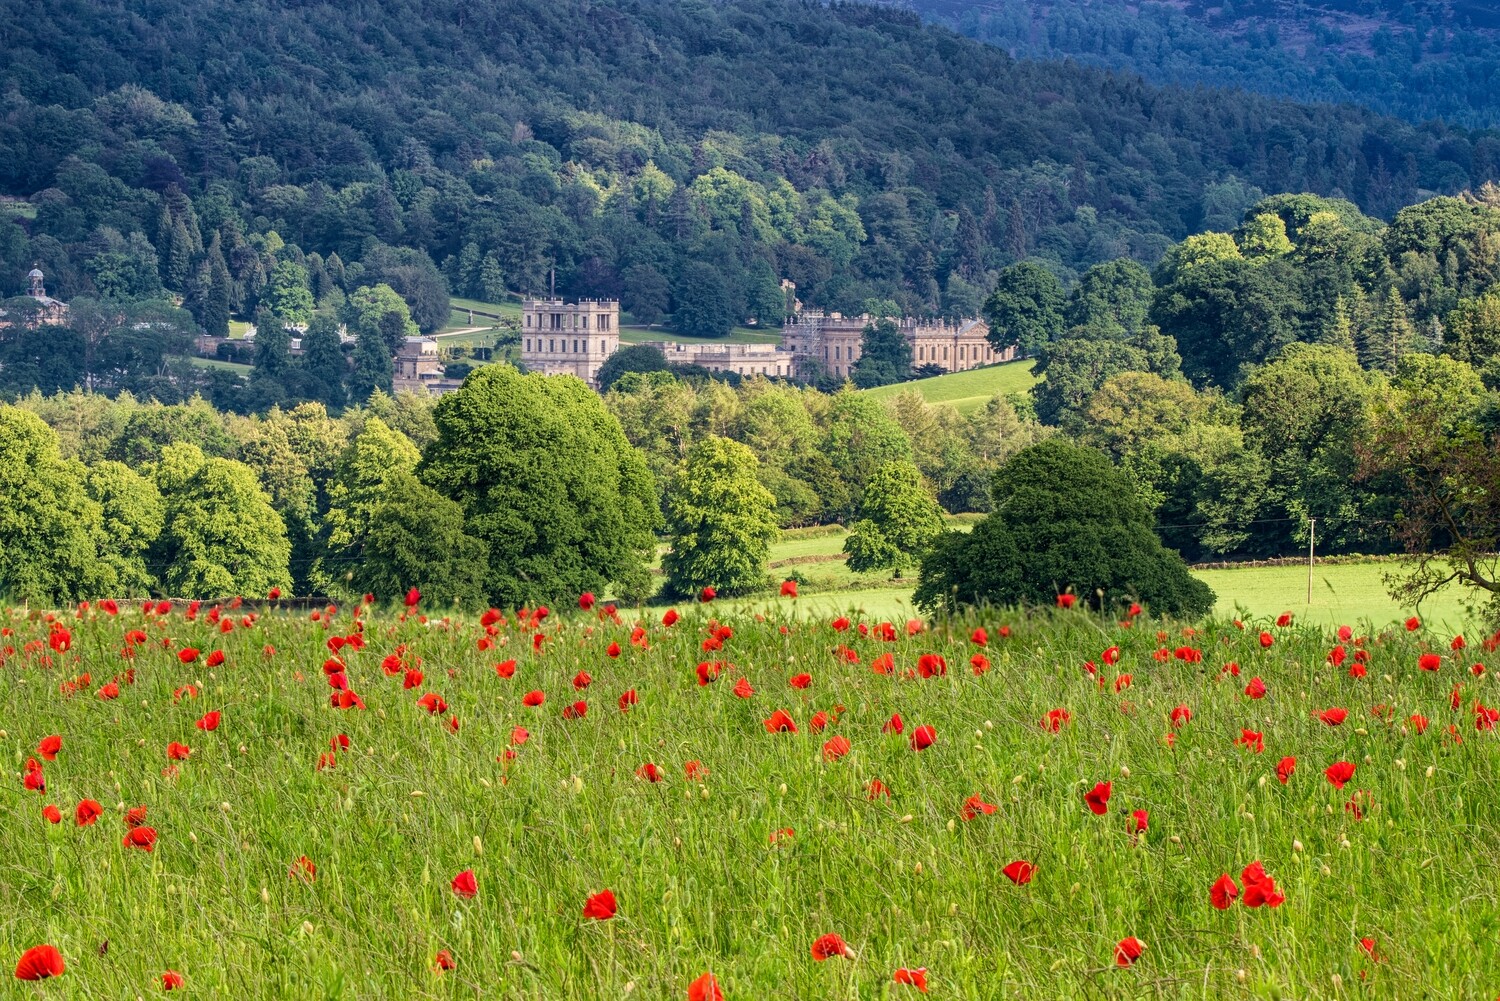 Bubnell Poppy Field and Chatsworth House